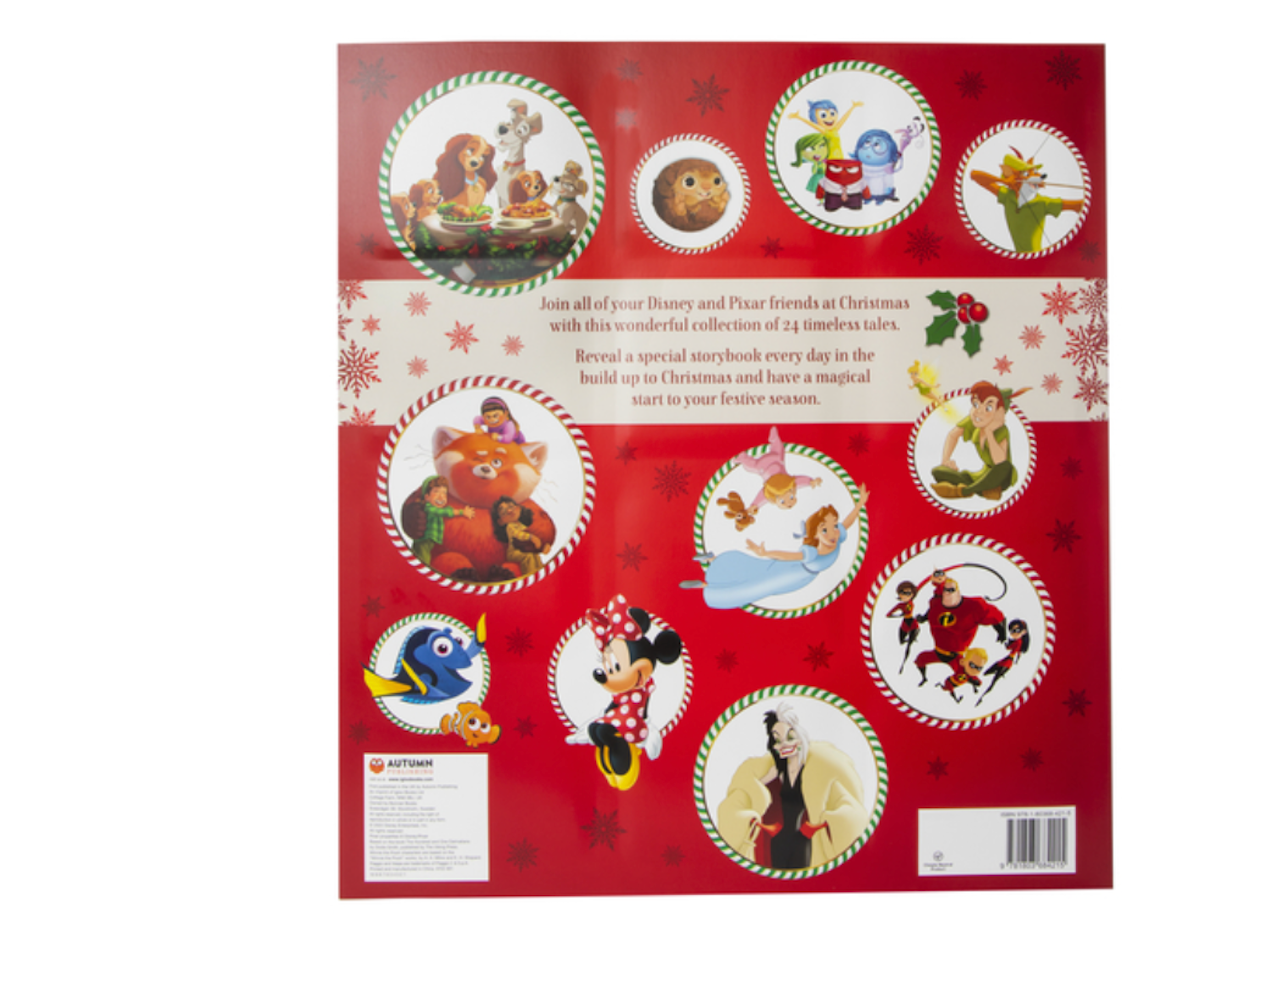 Disney Storybook Collection Advent Calendar with 24 Festive Books New